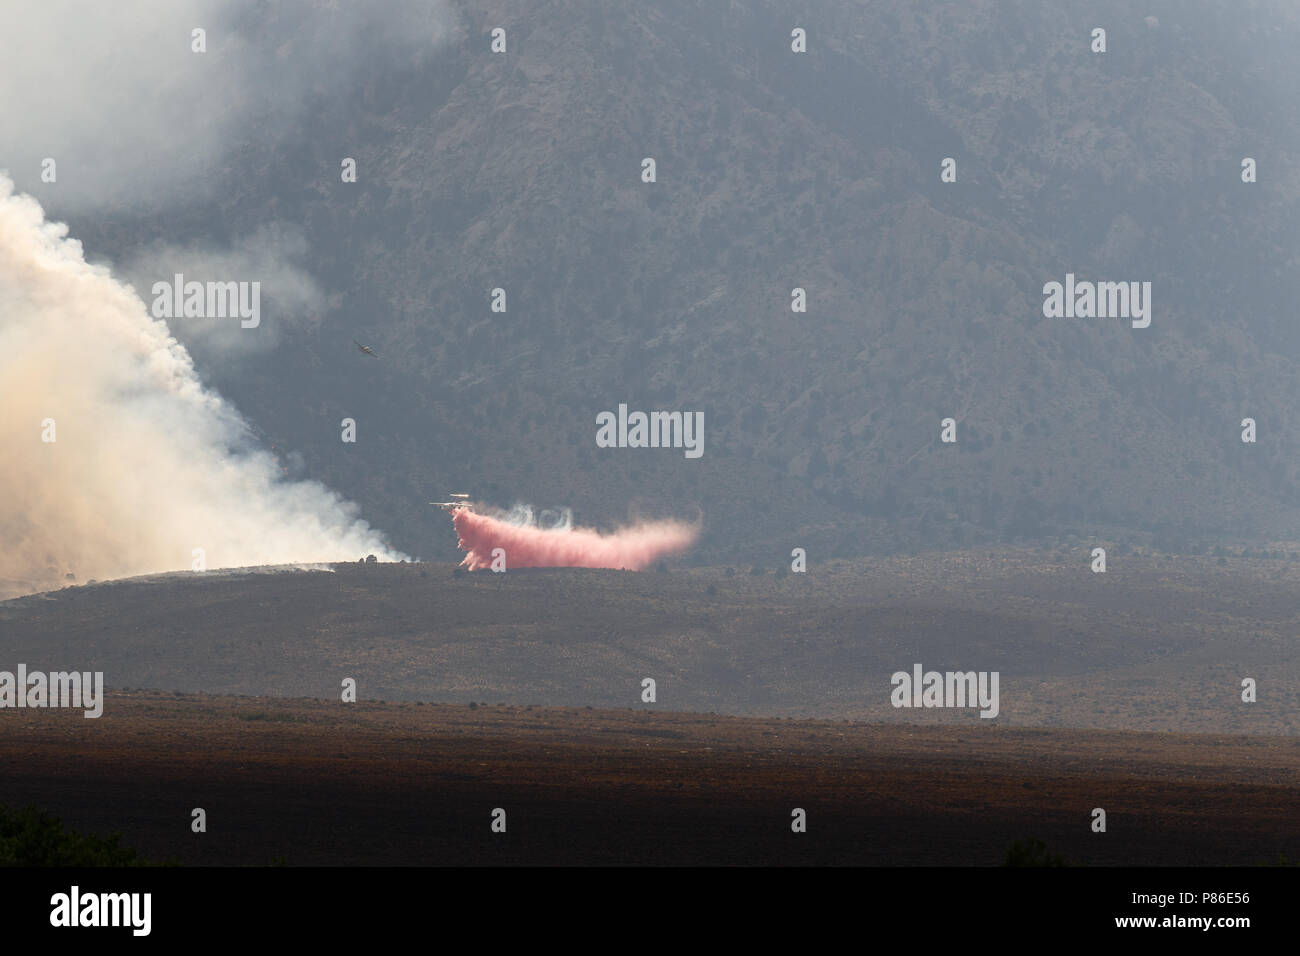 Alabama Hills, Lone Pine, CA. July 8, 2018. An air tanker deposits fire suppression material on the Georges Fire in the Alabama Hills west of Lone Pine, CA in eastern Sierra Nevadas.  The cause is under investigation. Lightning had been observed in the area. Fire crews from Inyo National Forest, the Bureau of Land Management (BLM),  CALFIRE, and local fire departments are fighting the fire with assistance from air tankers and helicopters. The helicopters are drawing water from the nearby California aquaduct. Stock Photo